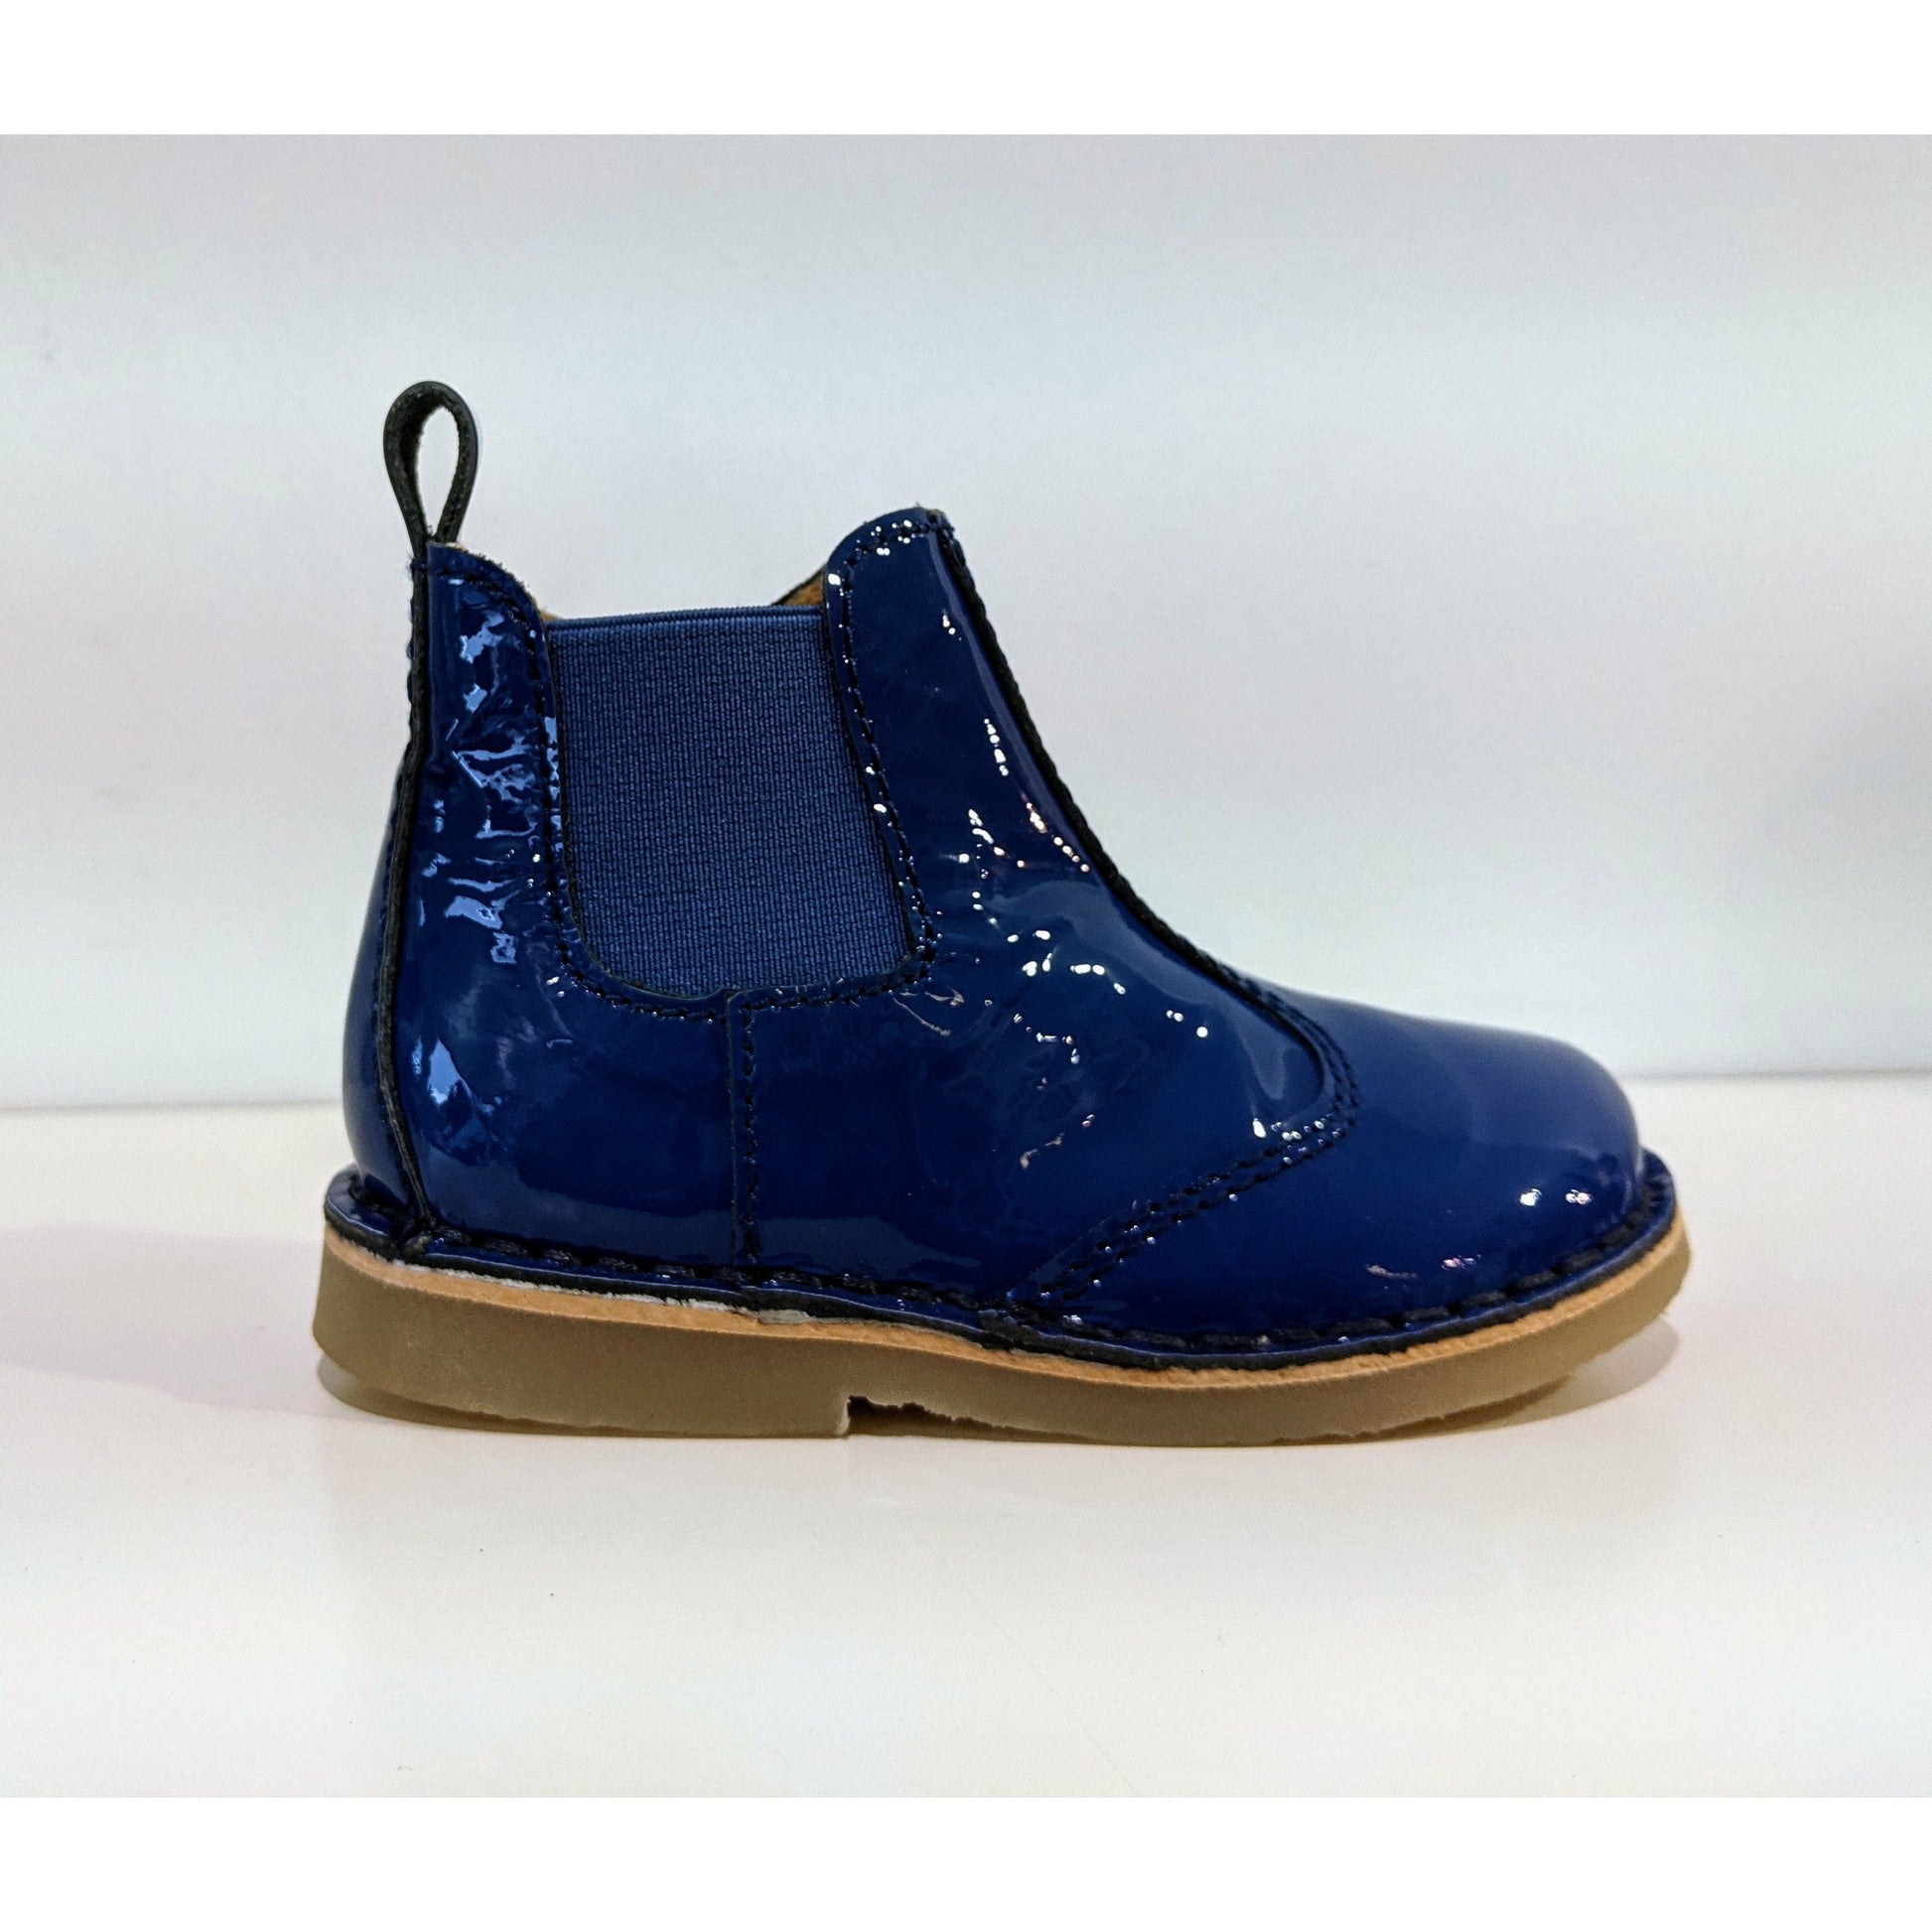 A girls chelsea boot by Petasil,style Keel,in blue patent with zip fastening. Right side view.